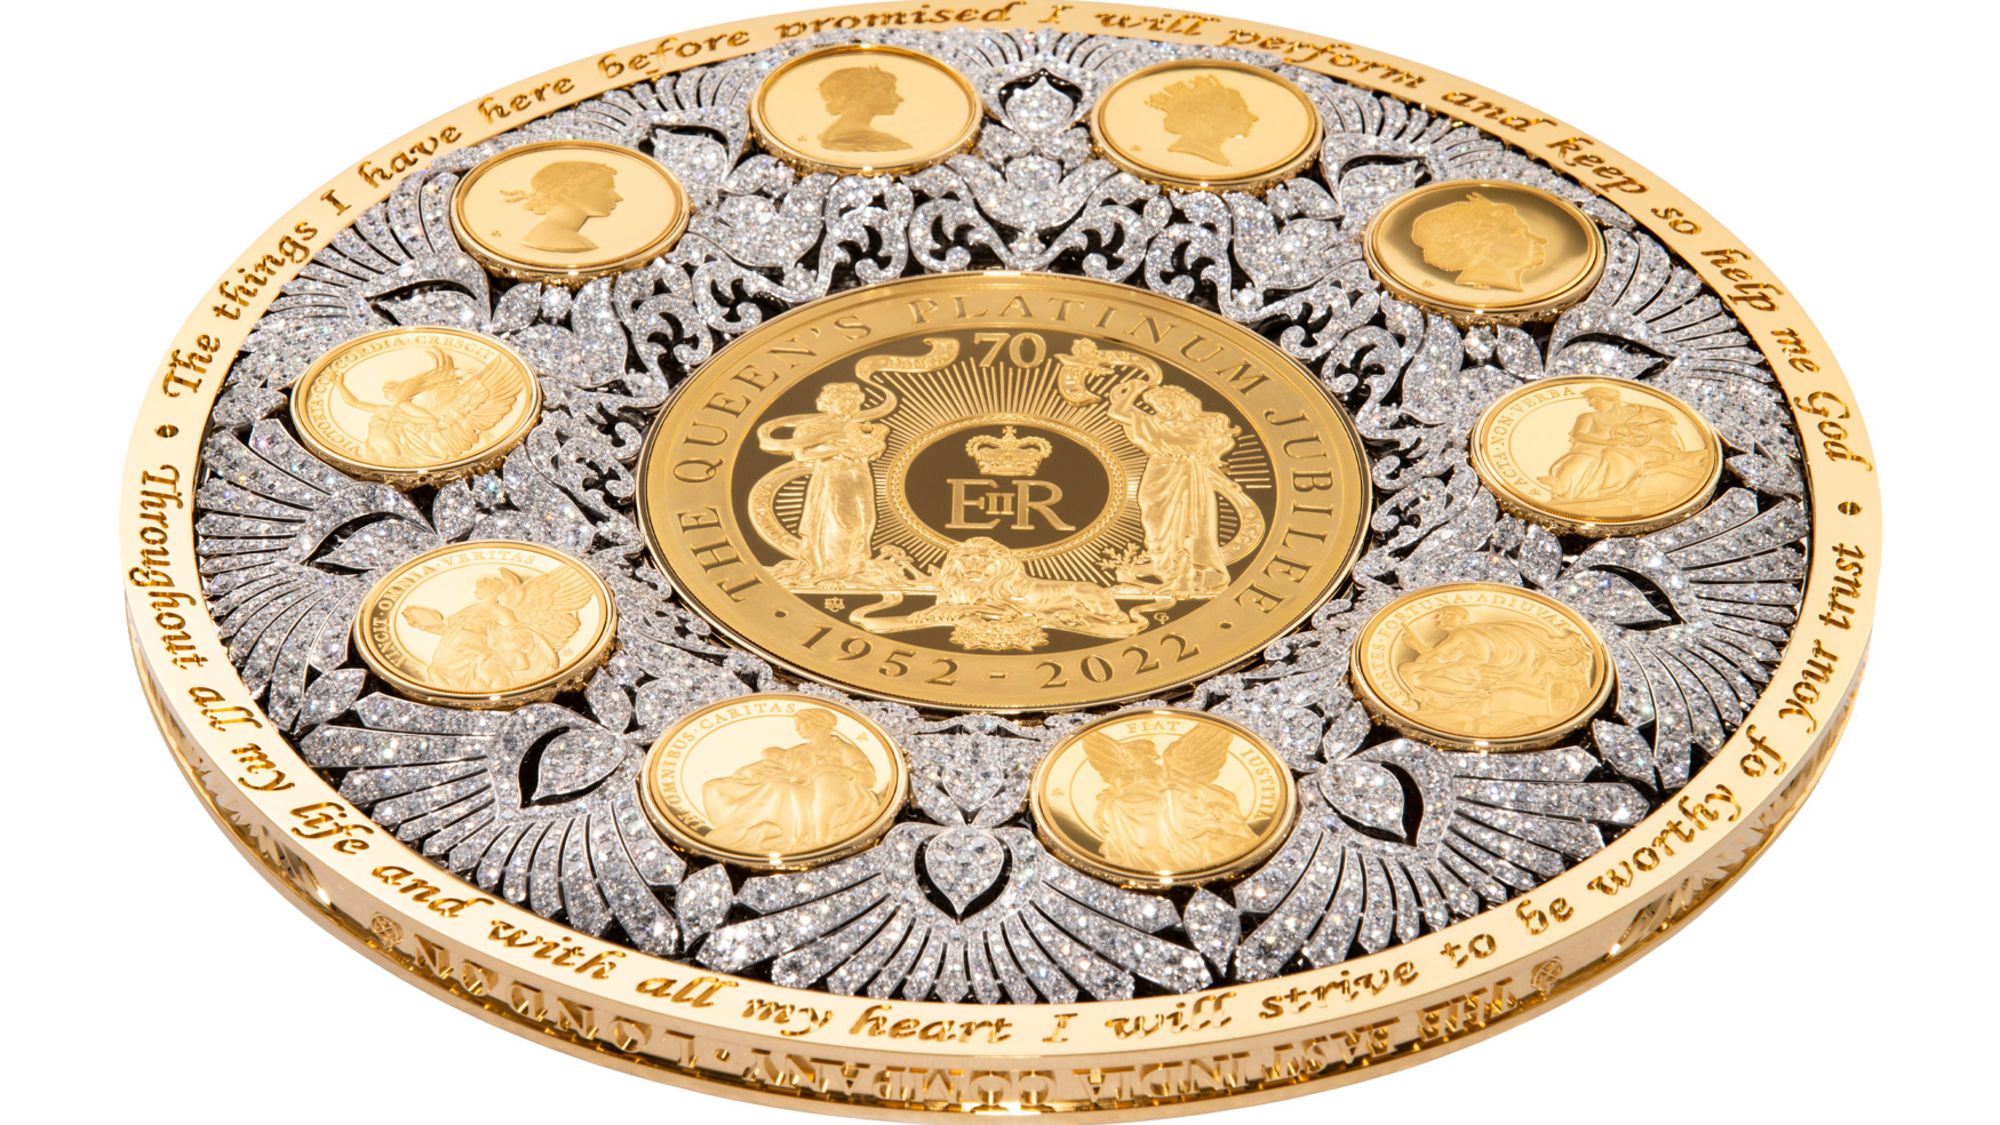 Basketball-sized gold coin worth 'around $23M' honors late Queen